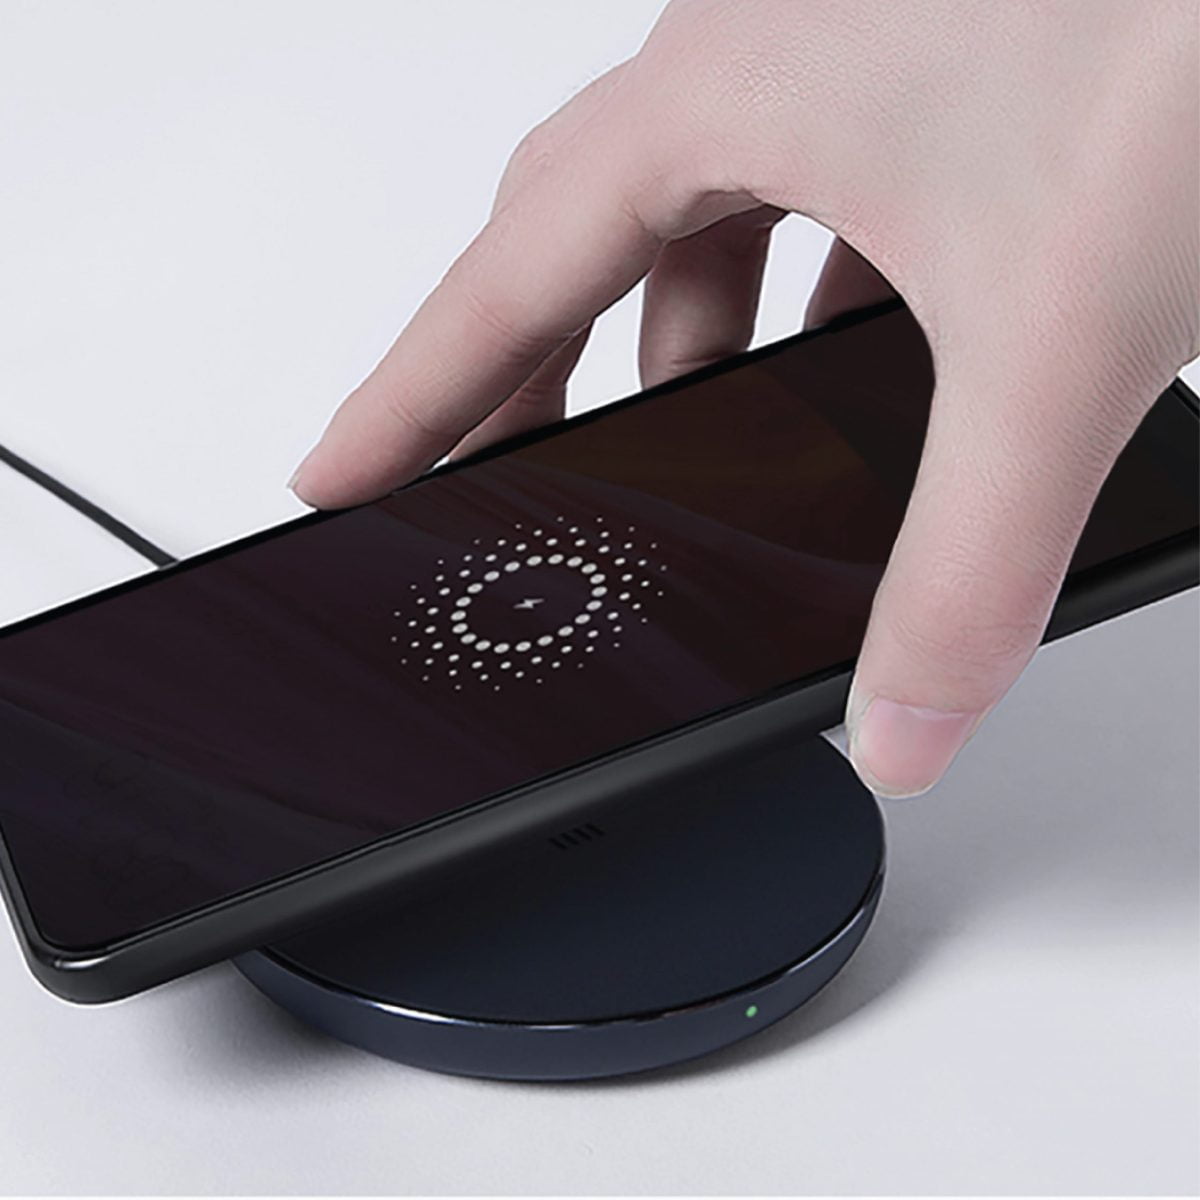 Charger 05 Scaled Xiaomi &Lt;H1&Gt;Original Xiaomi Qi Wireless Charger 10W Max Fast Wireless Charging Pad&Lt;/H1&Gt; Https://Youtu.be/Qy_Npulepve Charging Pad Mi Wireless Charging Pad